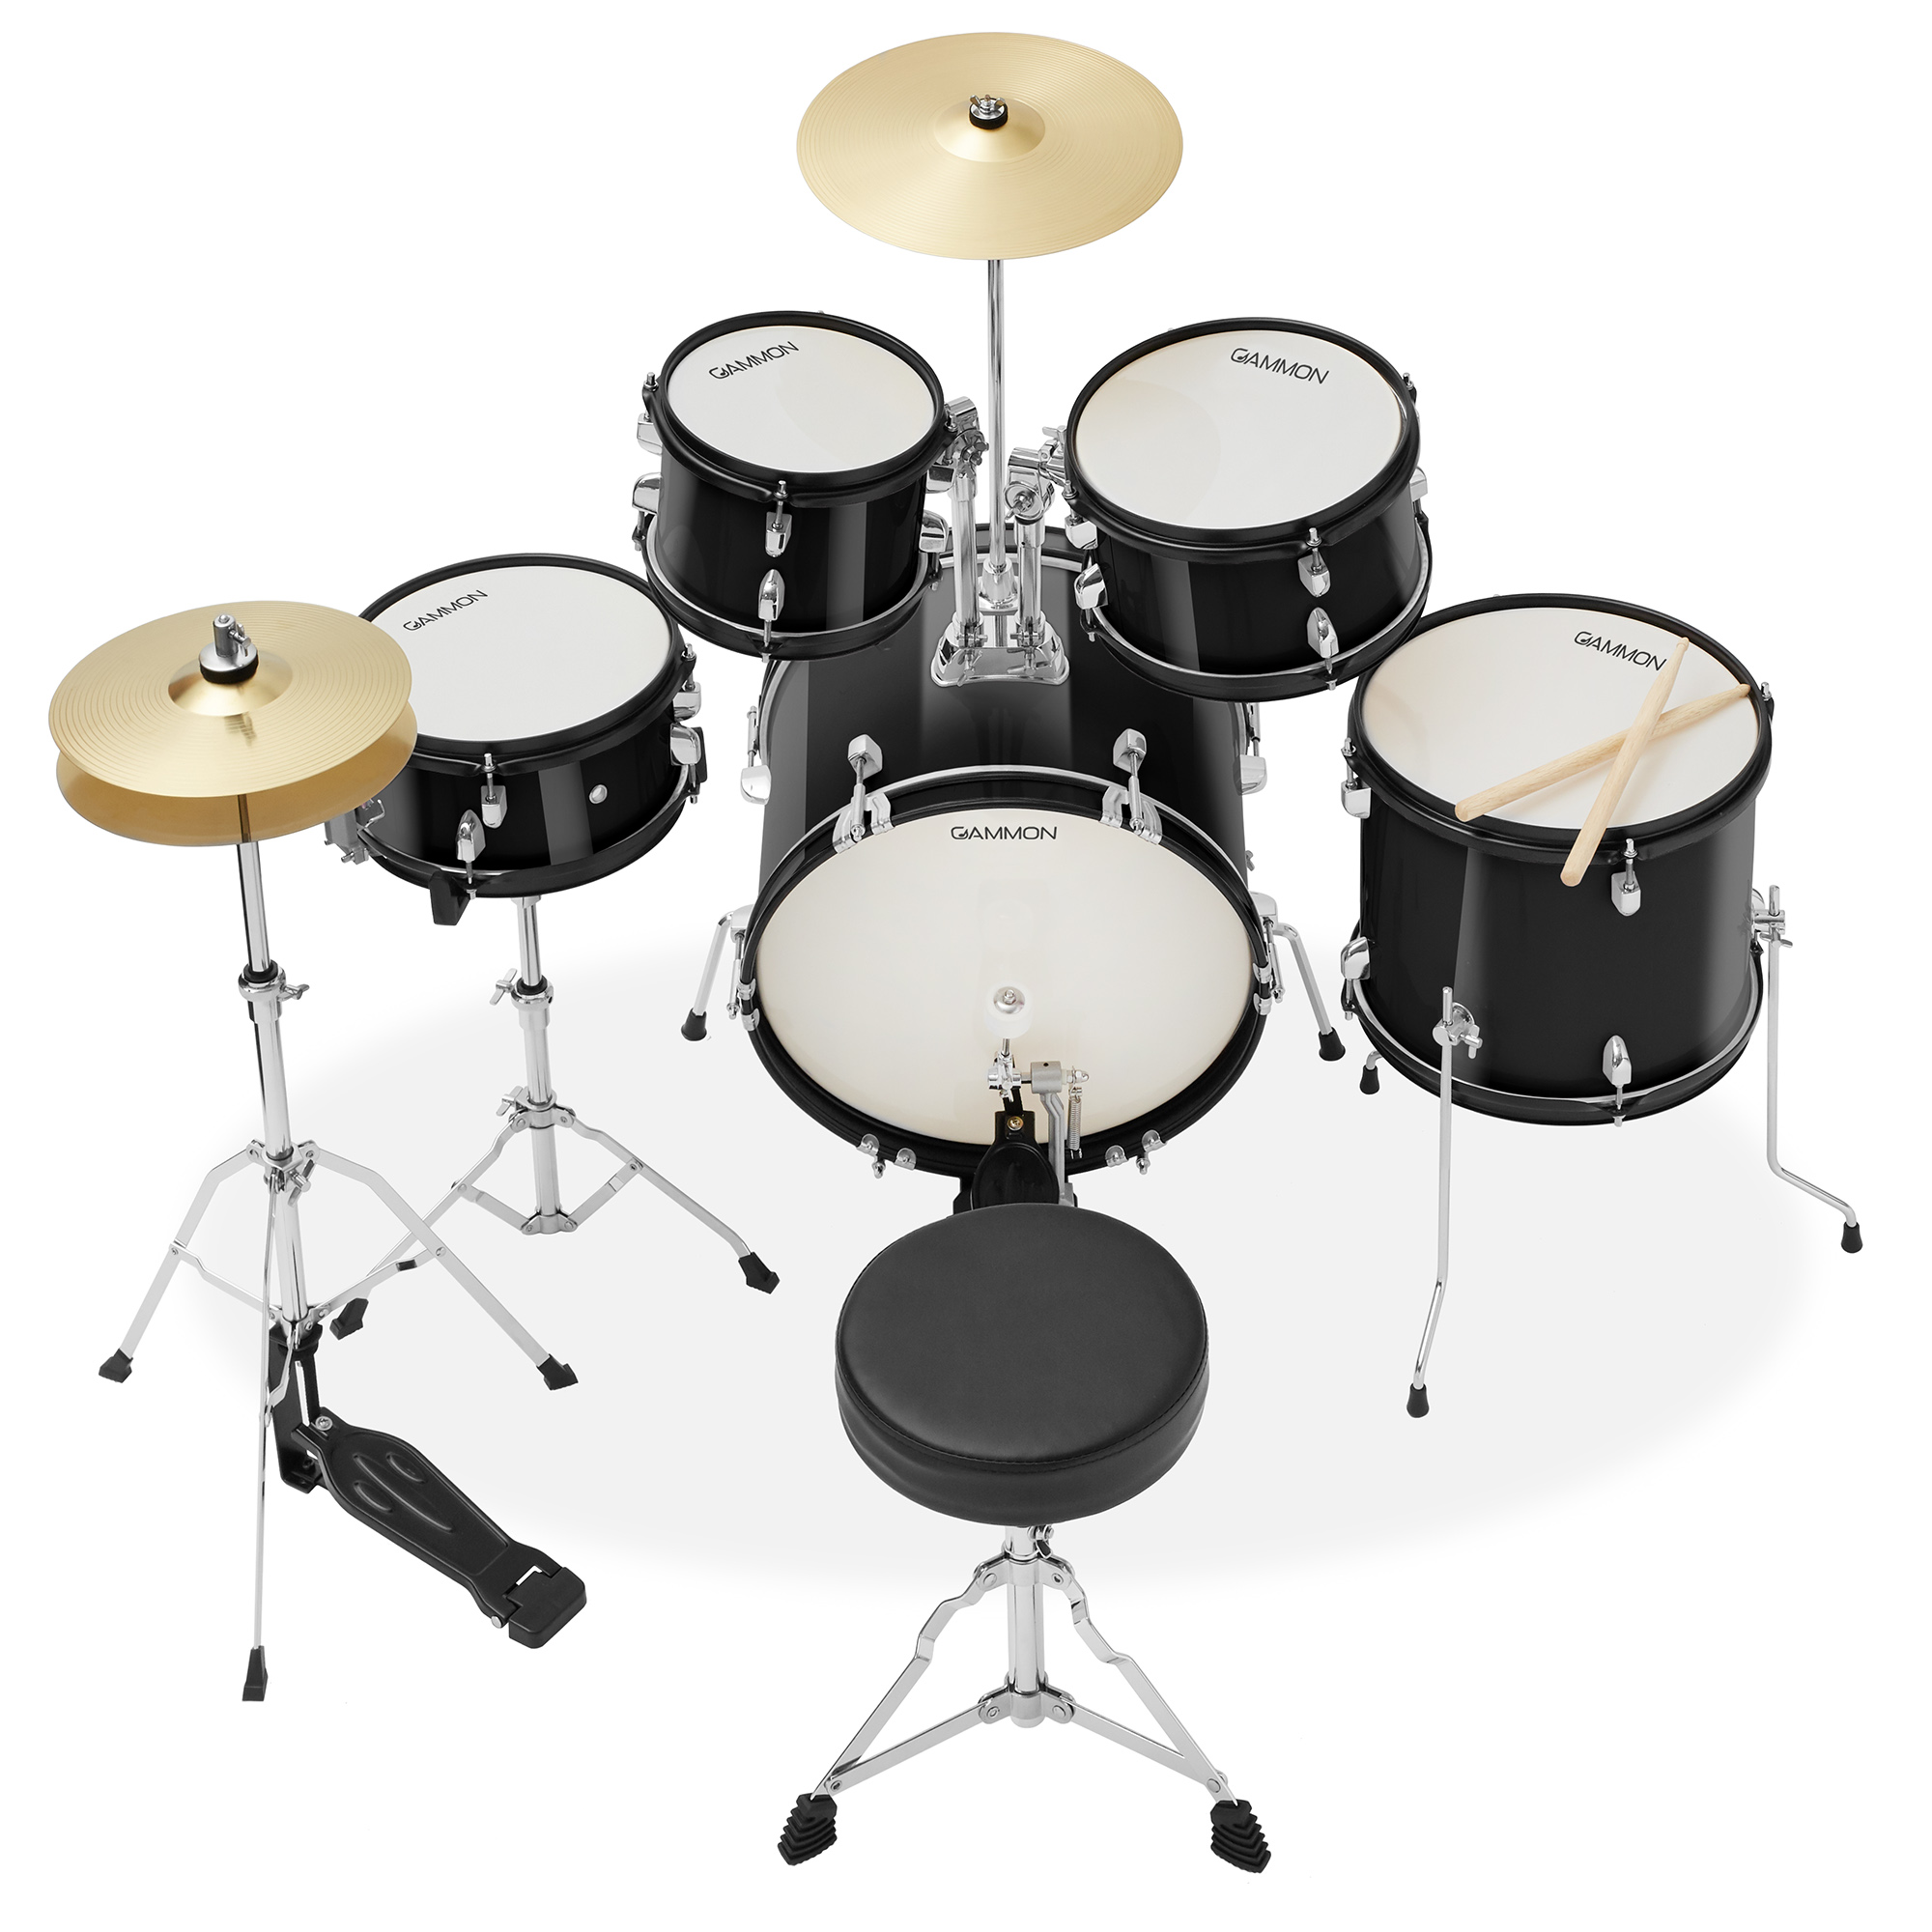 Gammon Percussion 5pc Junior Drum Set - Beginner Kit with Stool & Stands - Black - image 2 of 7